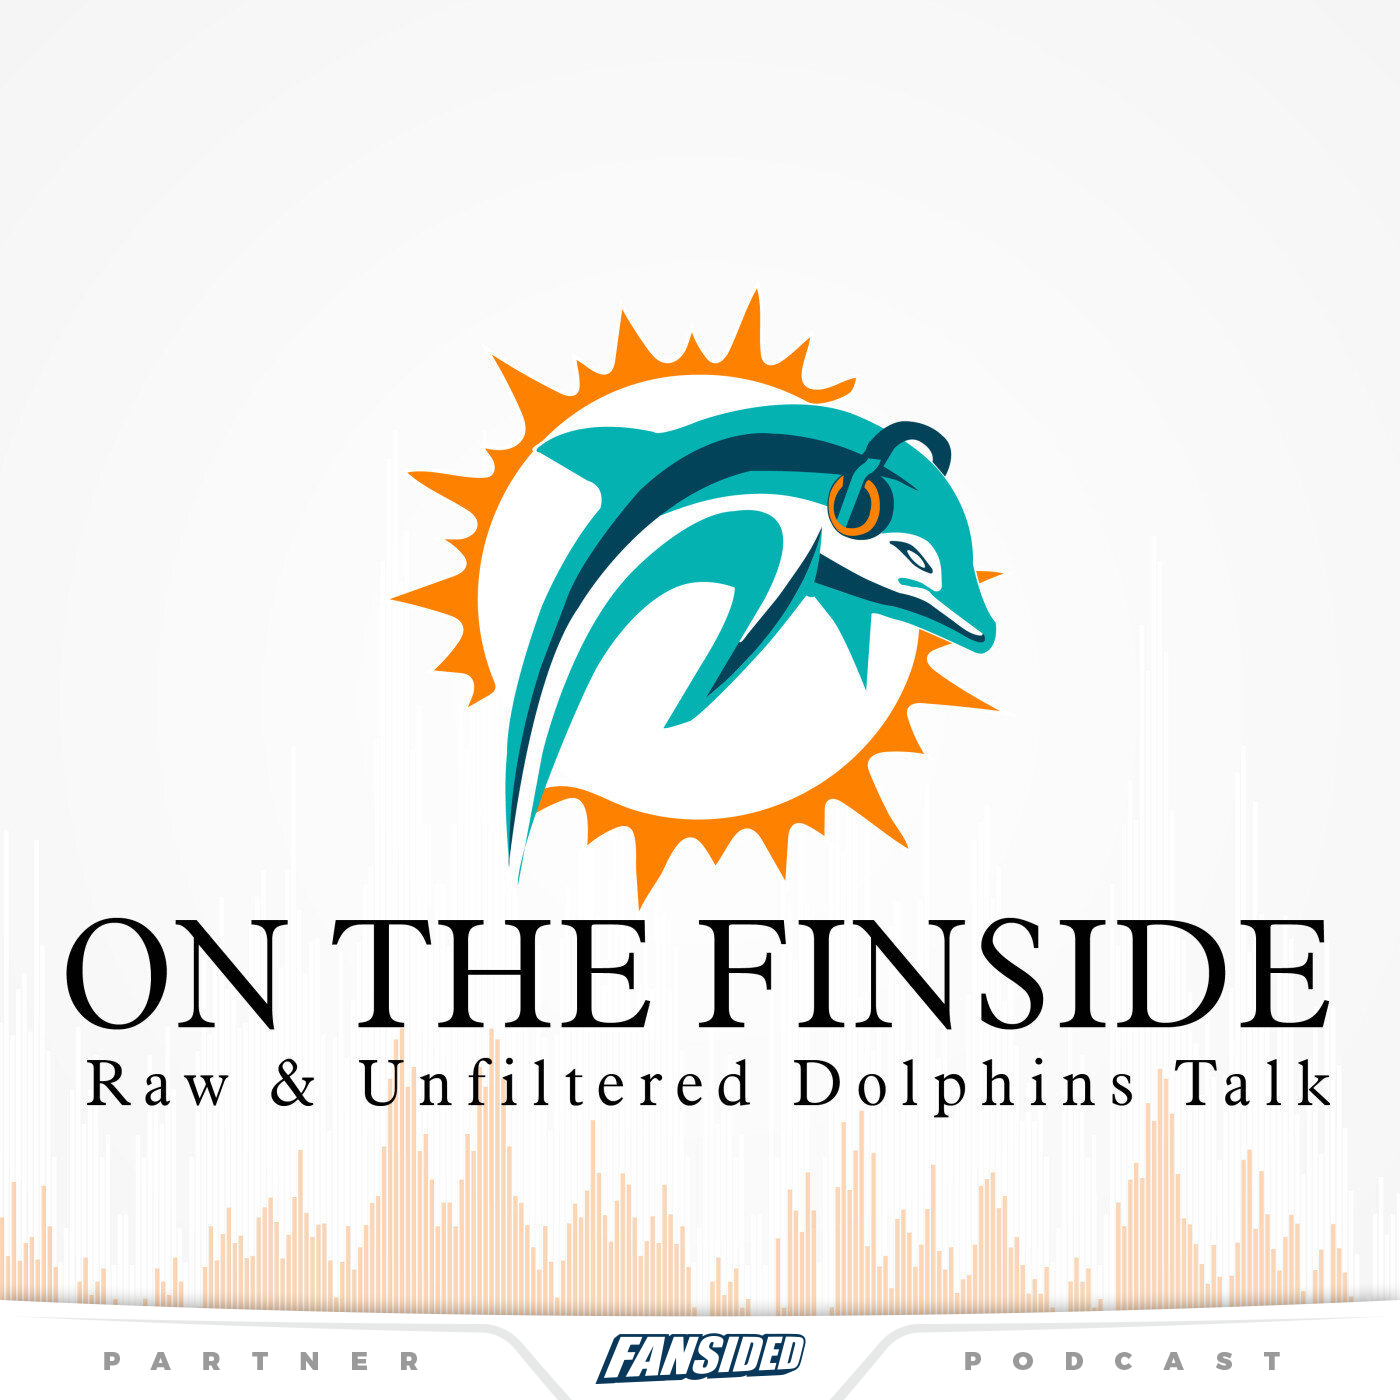 2021 Dolphins Draft - Rd 1 Pick 6 - WR Jaylen Waddle Analysis & Grade